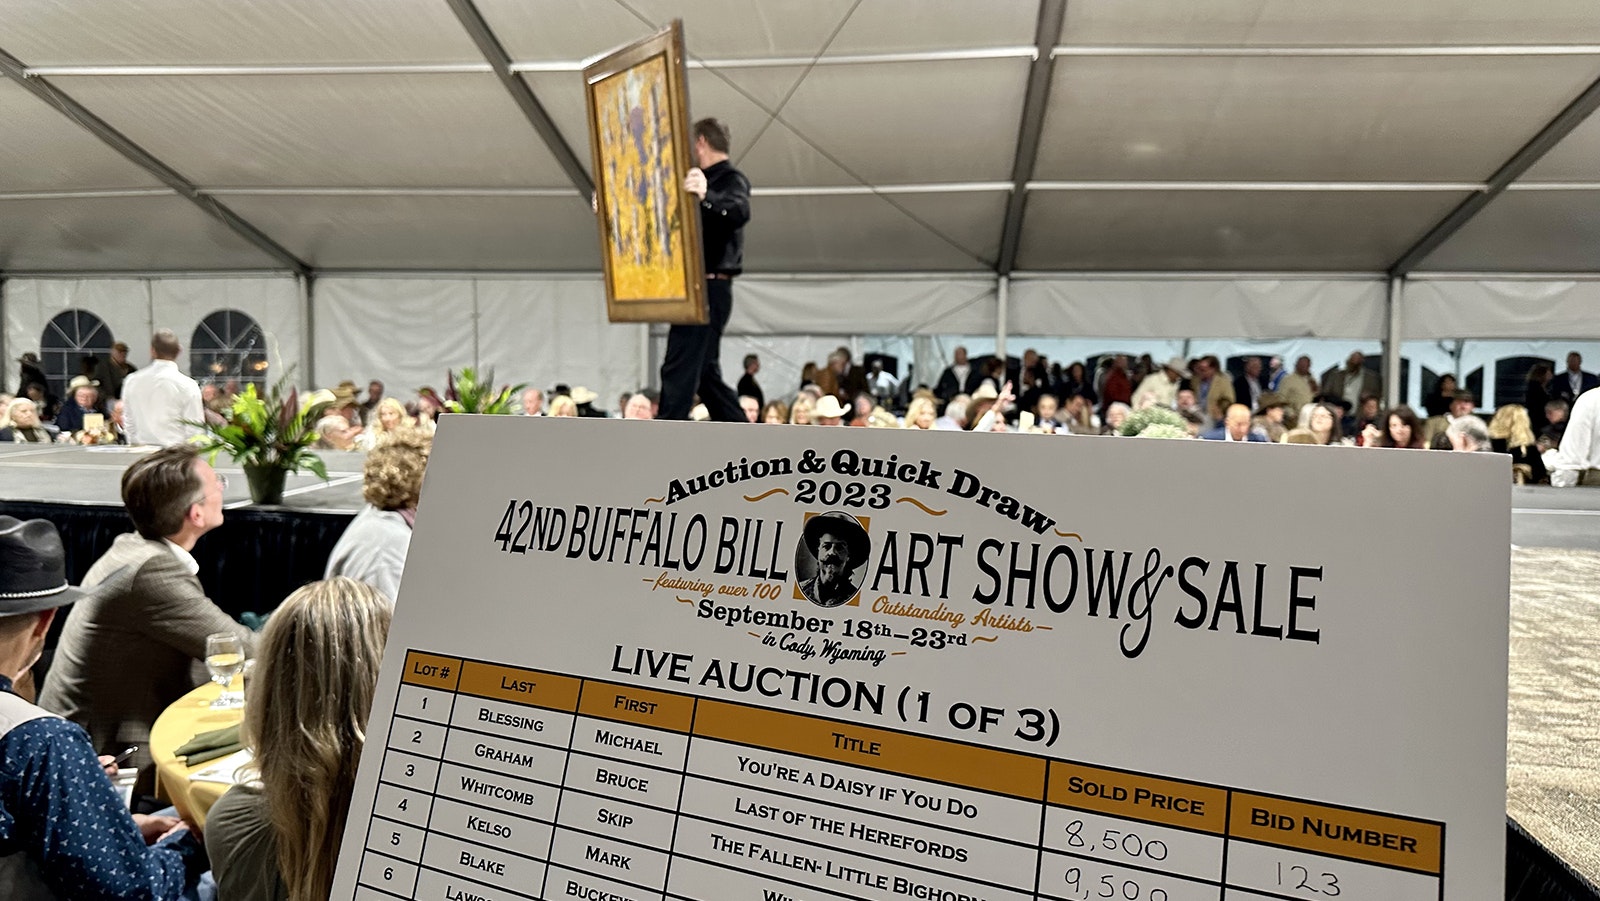 A painting is auctioned off during last month's Buffalo Bill Art Show and Sale in Cody, Wyoming.